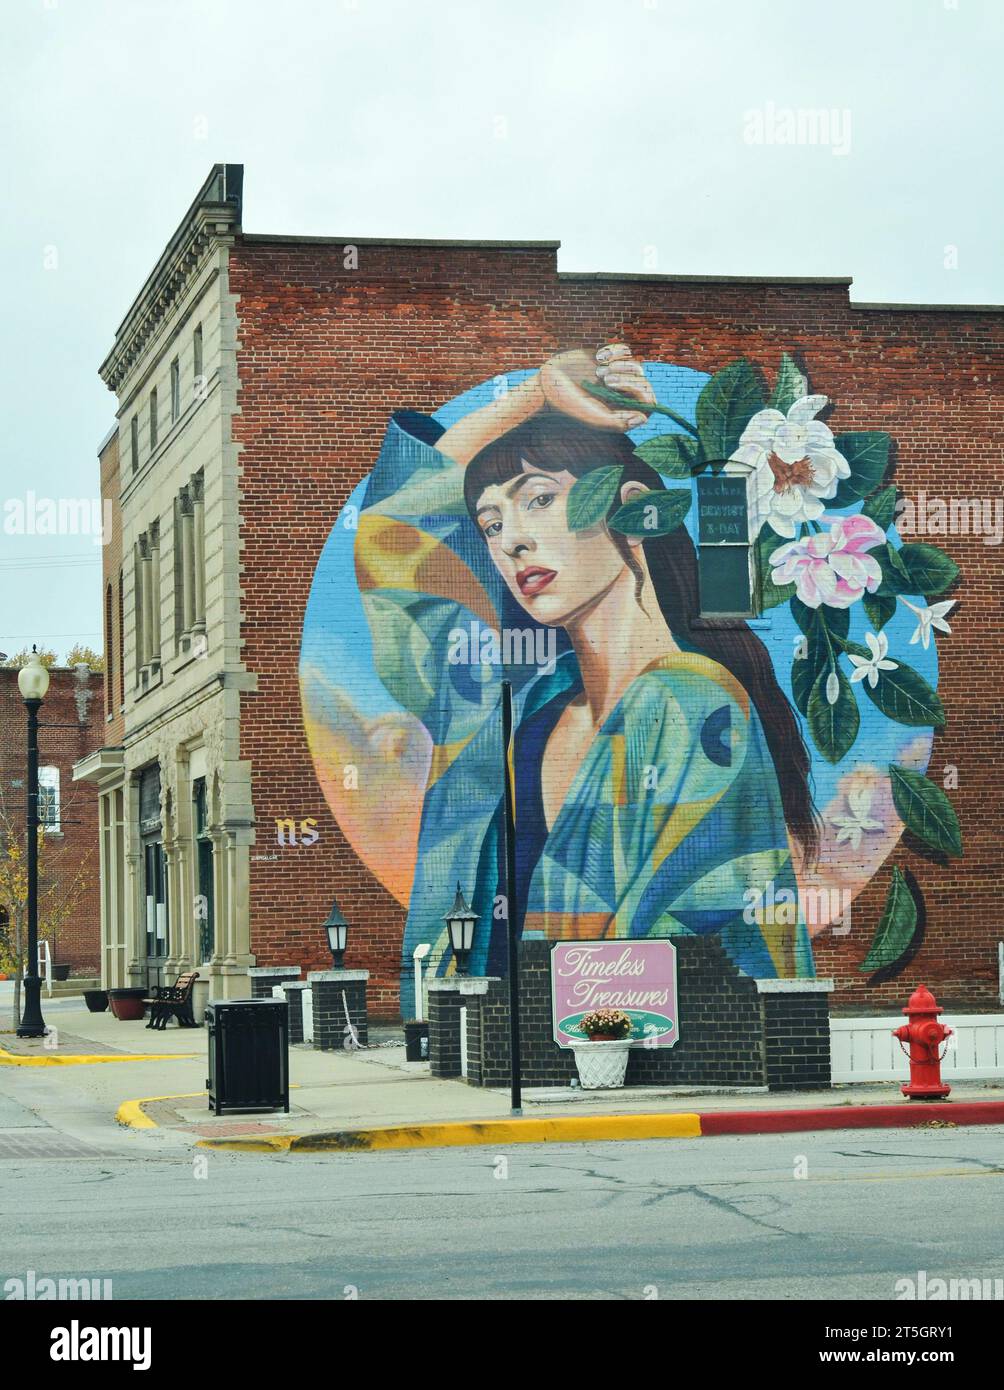 Mural in a small town Stock Photo